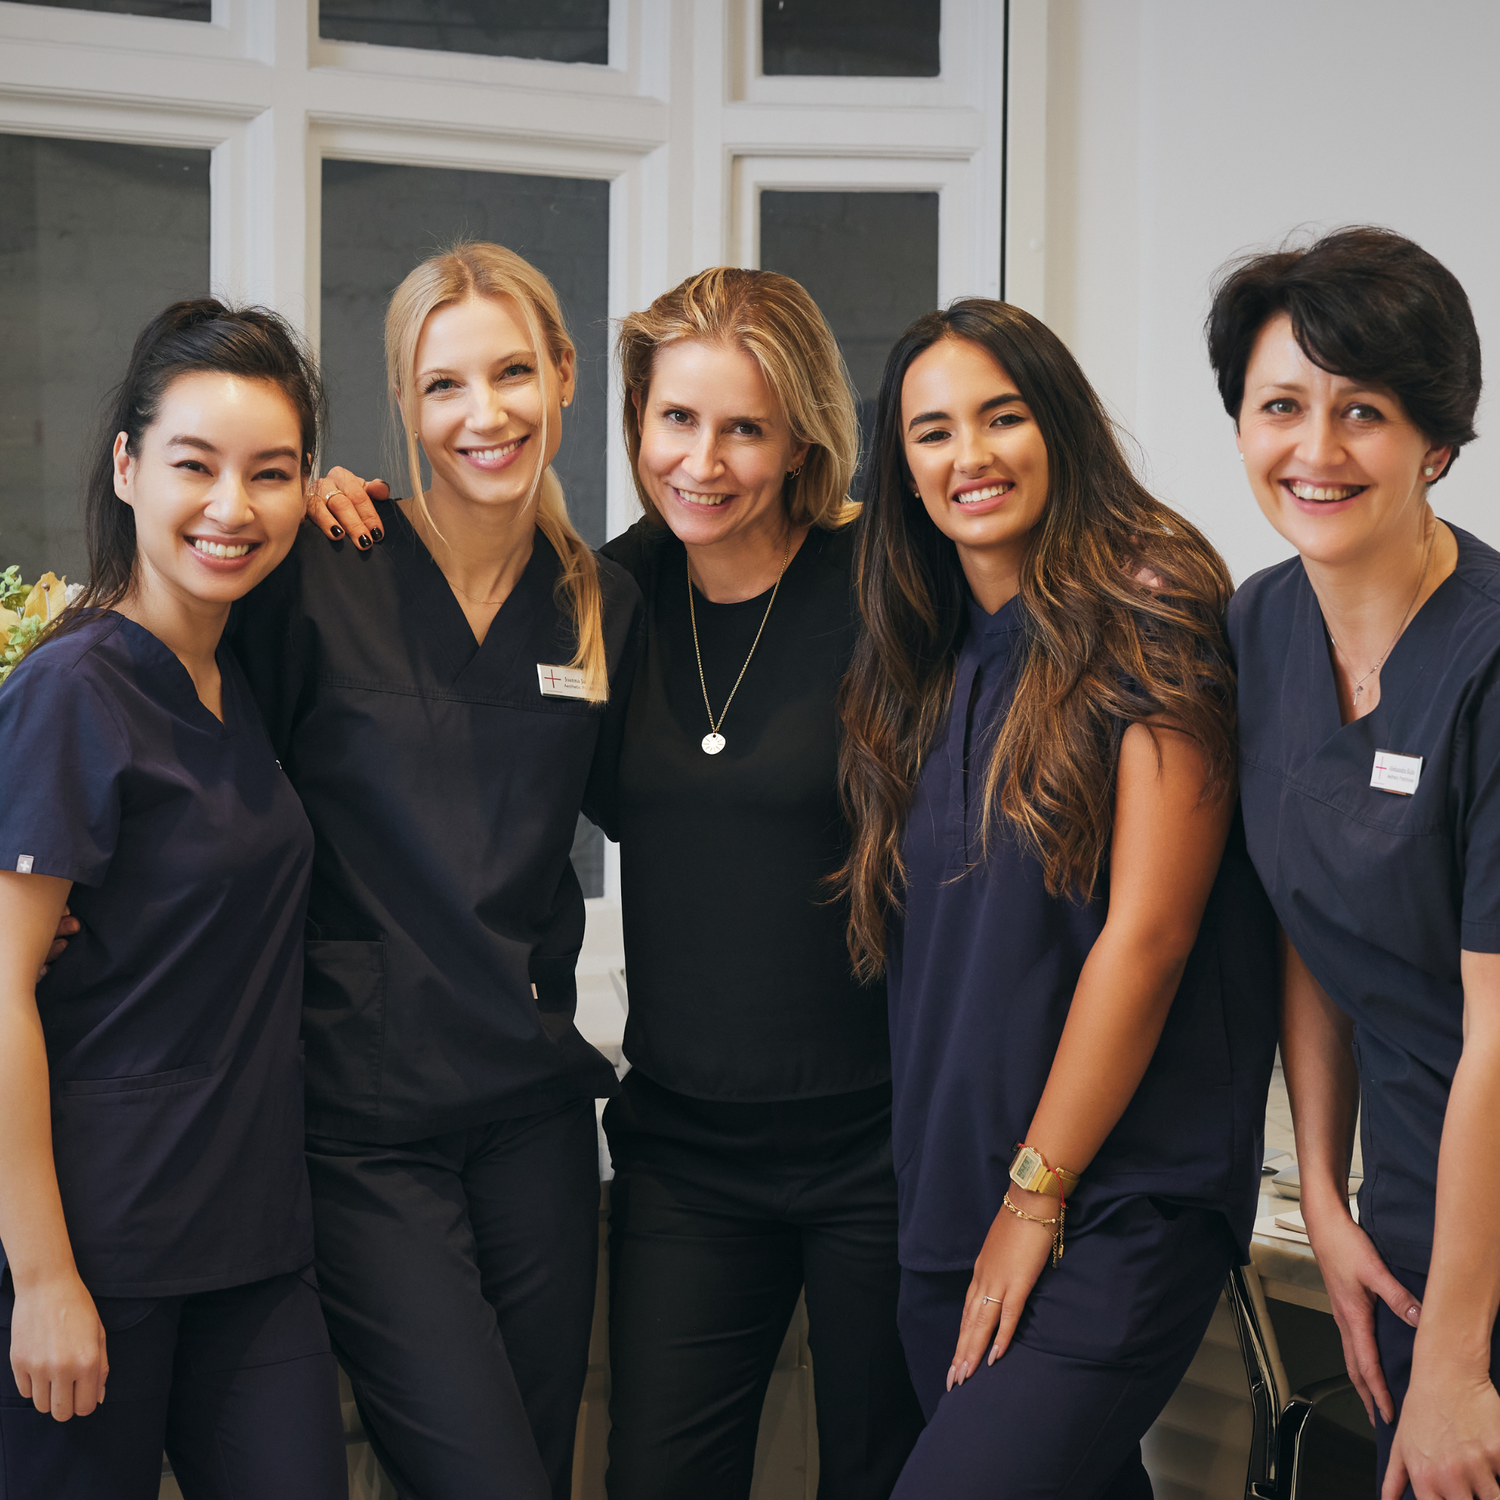 The experienced Medicetics Team at their Central London aesthetic clinic